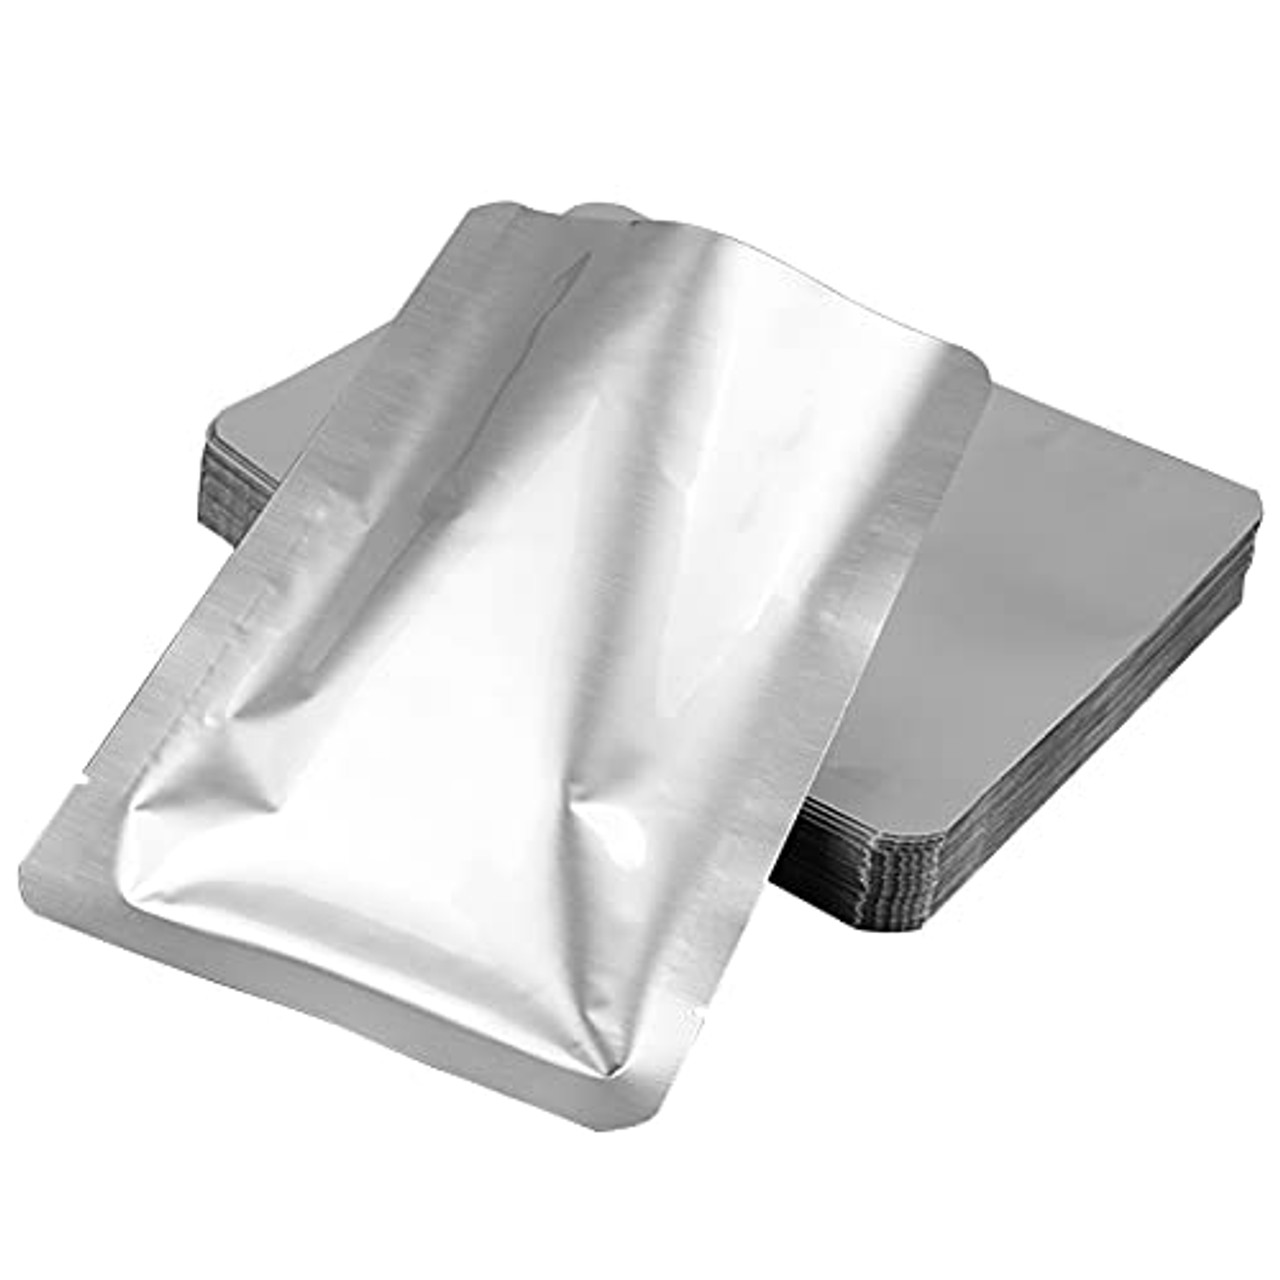 Heat Seal Foil Packaging Bags, Empty Flat Bags for Creams and Lotions  Single Use